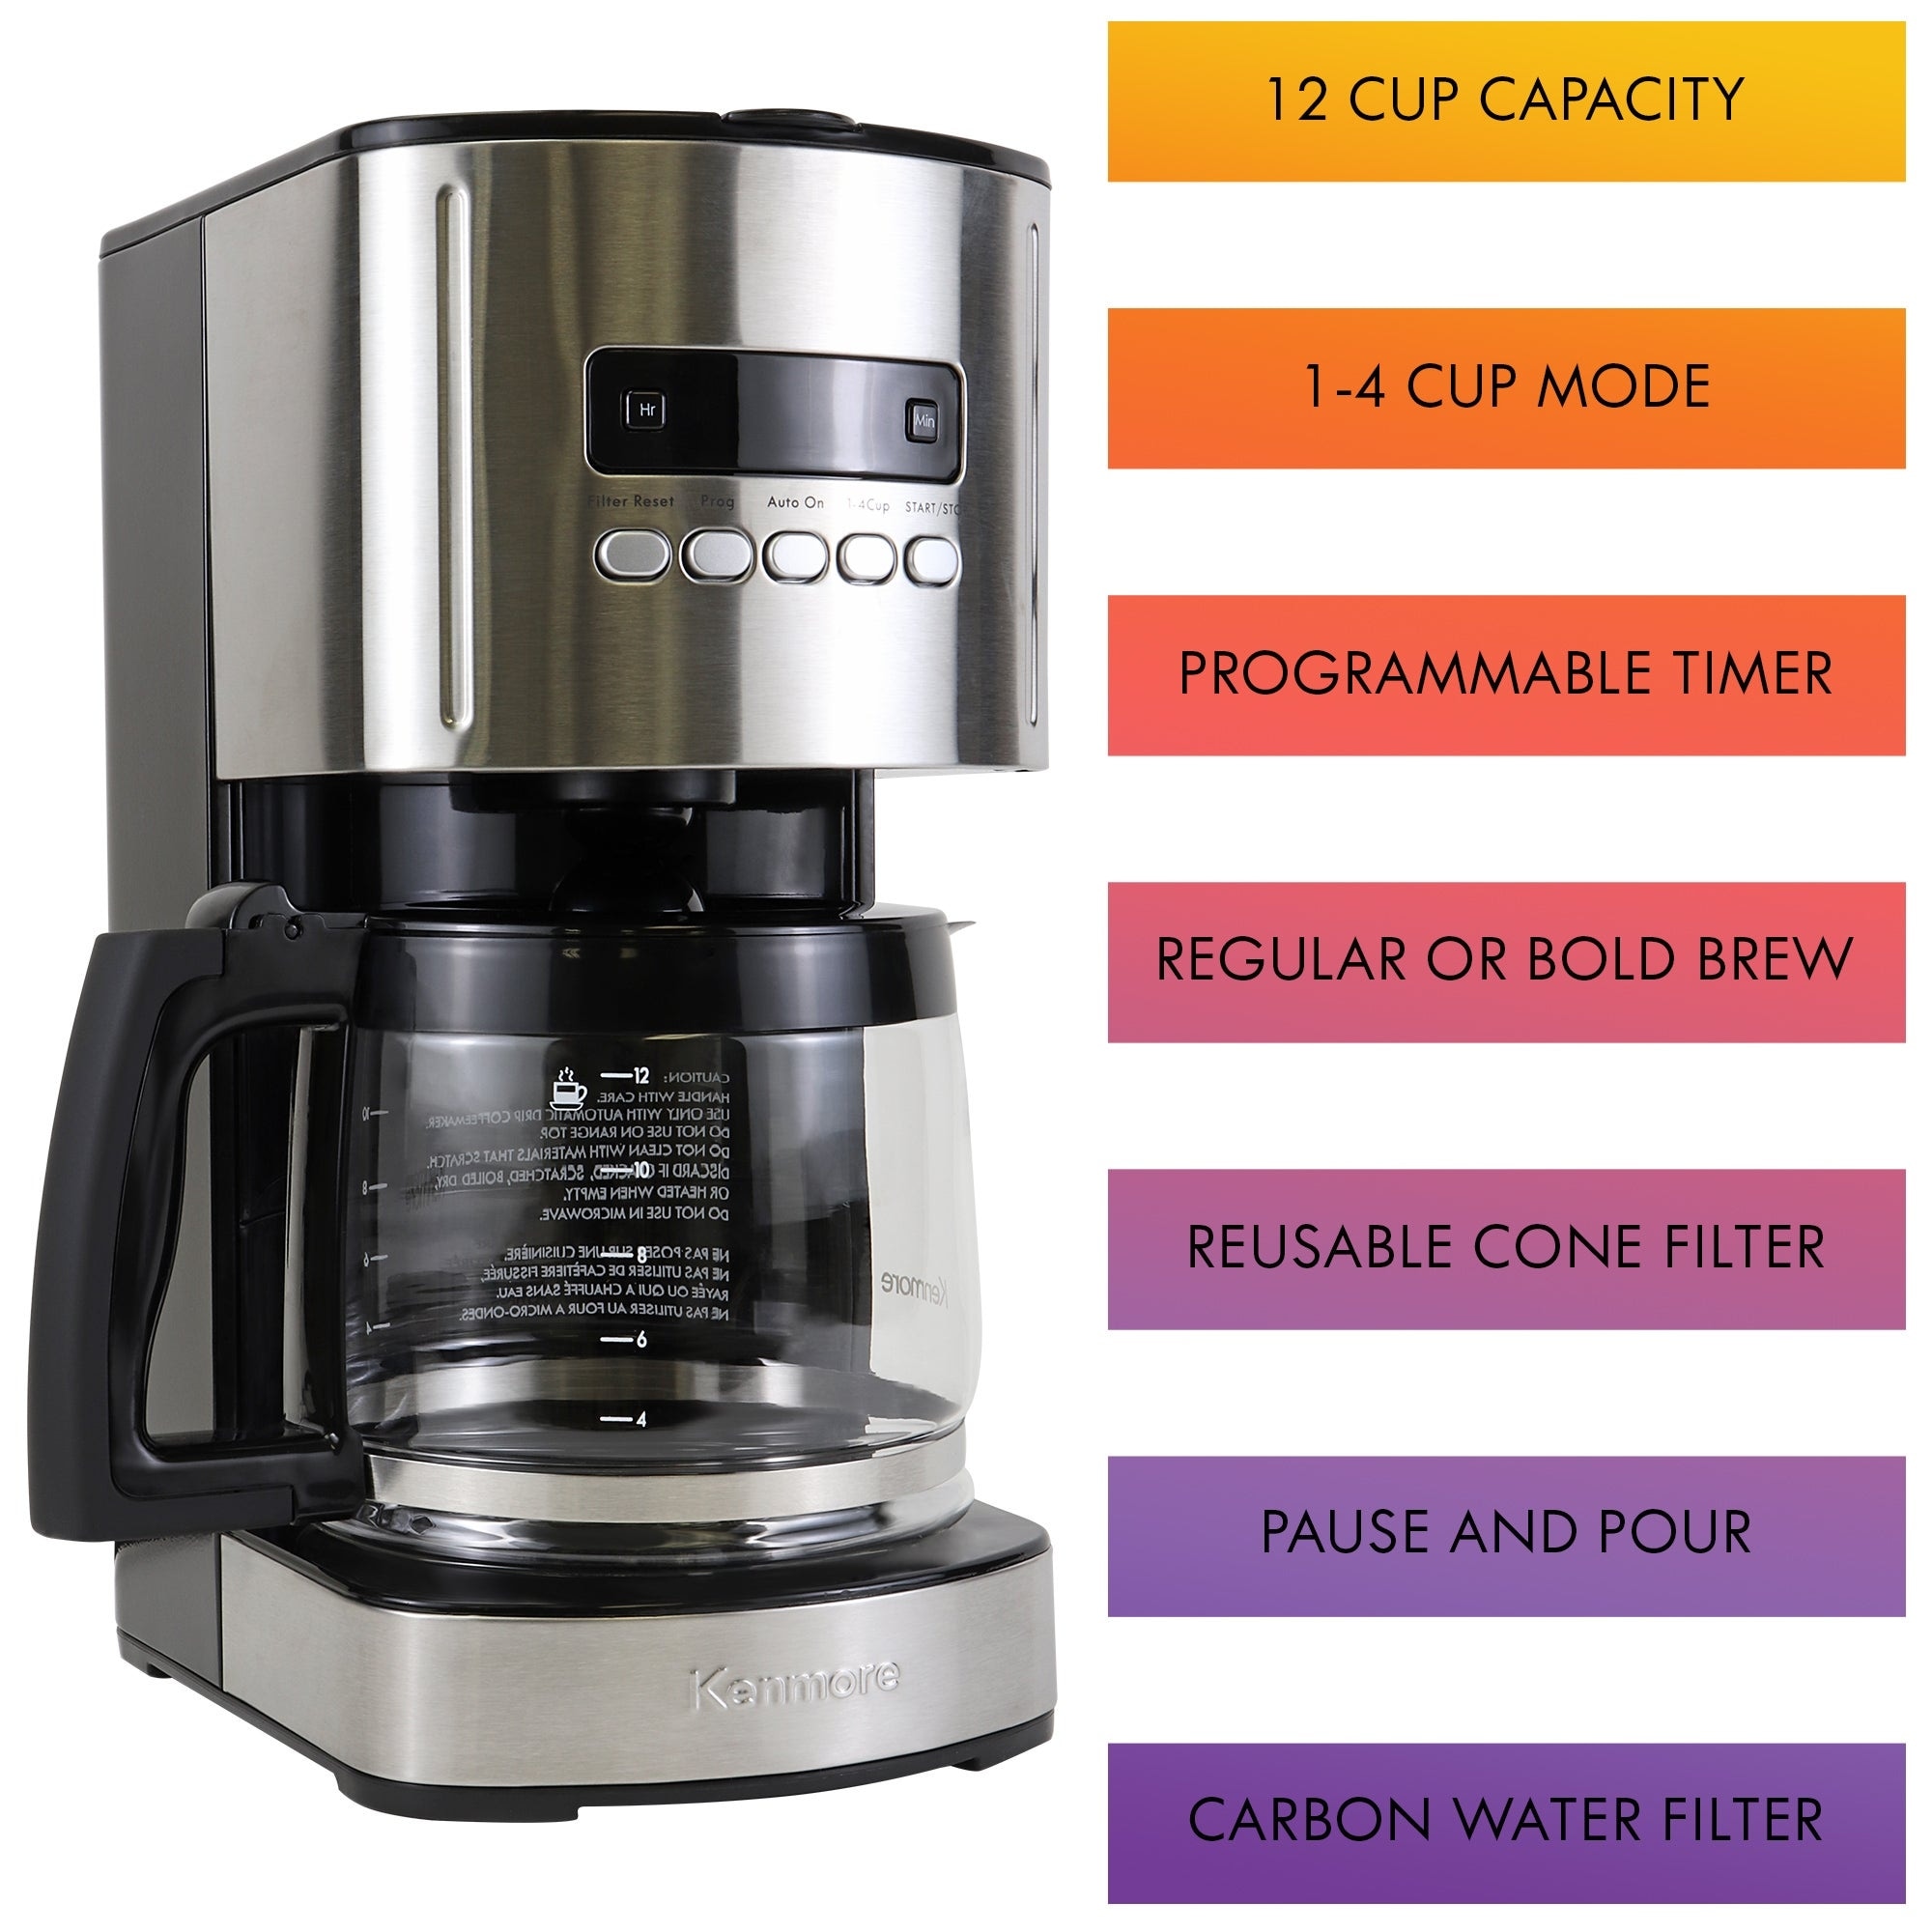 https://ak1.ostkcdn.com/images/products/is/images/direct/94b02c2a9ea18caacbeec4dfd71a1e4f4b16cffc/Kenmore-Programmable-12-cup-Coffee-Maker%2C-Black-and-Stainless-Steel.jpg